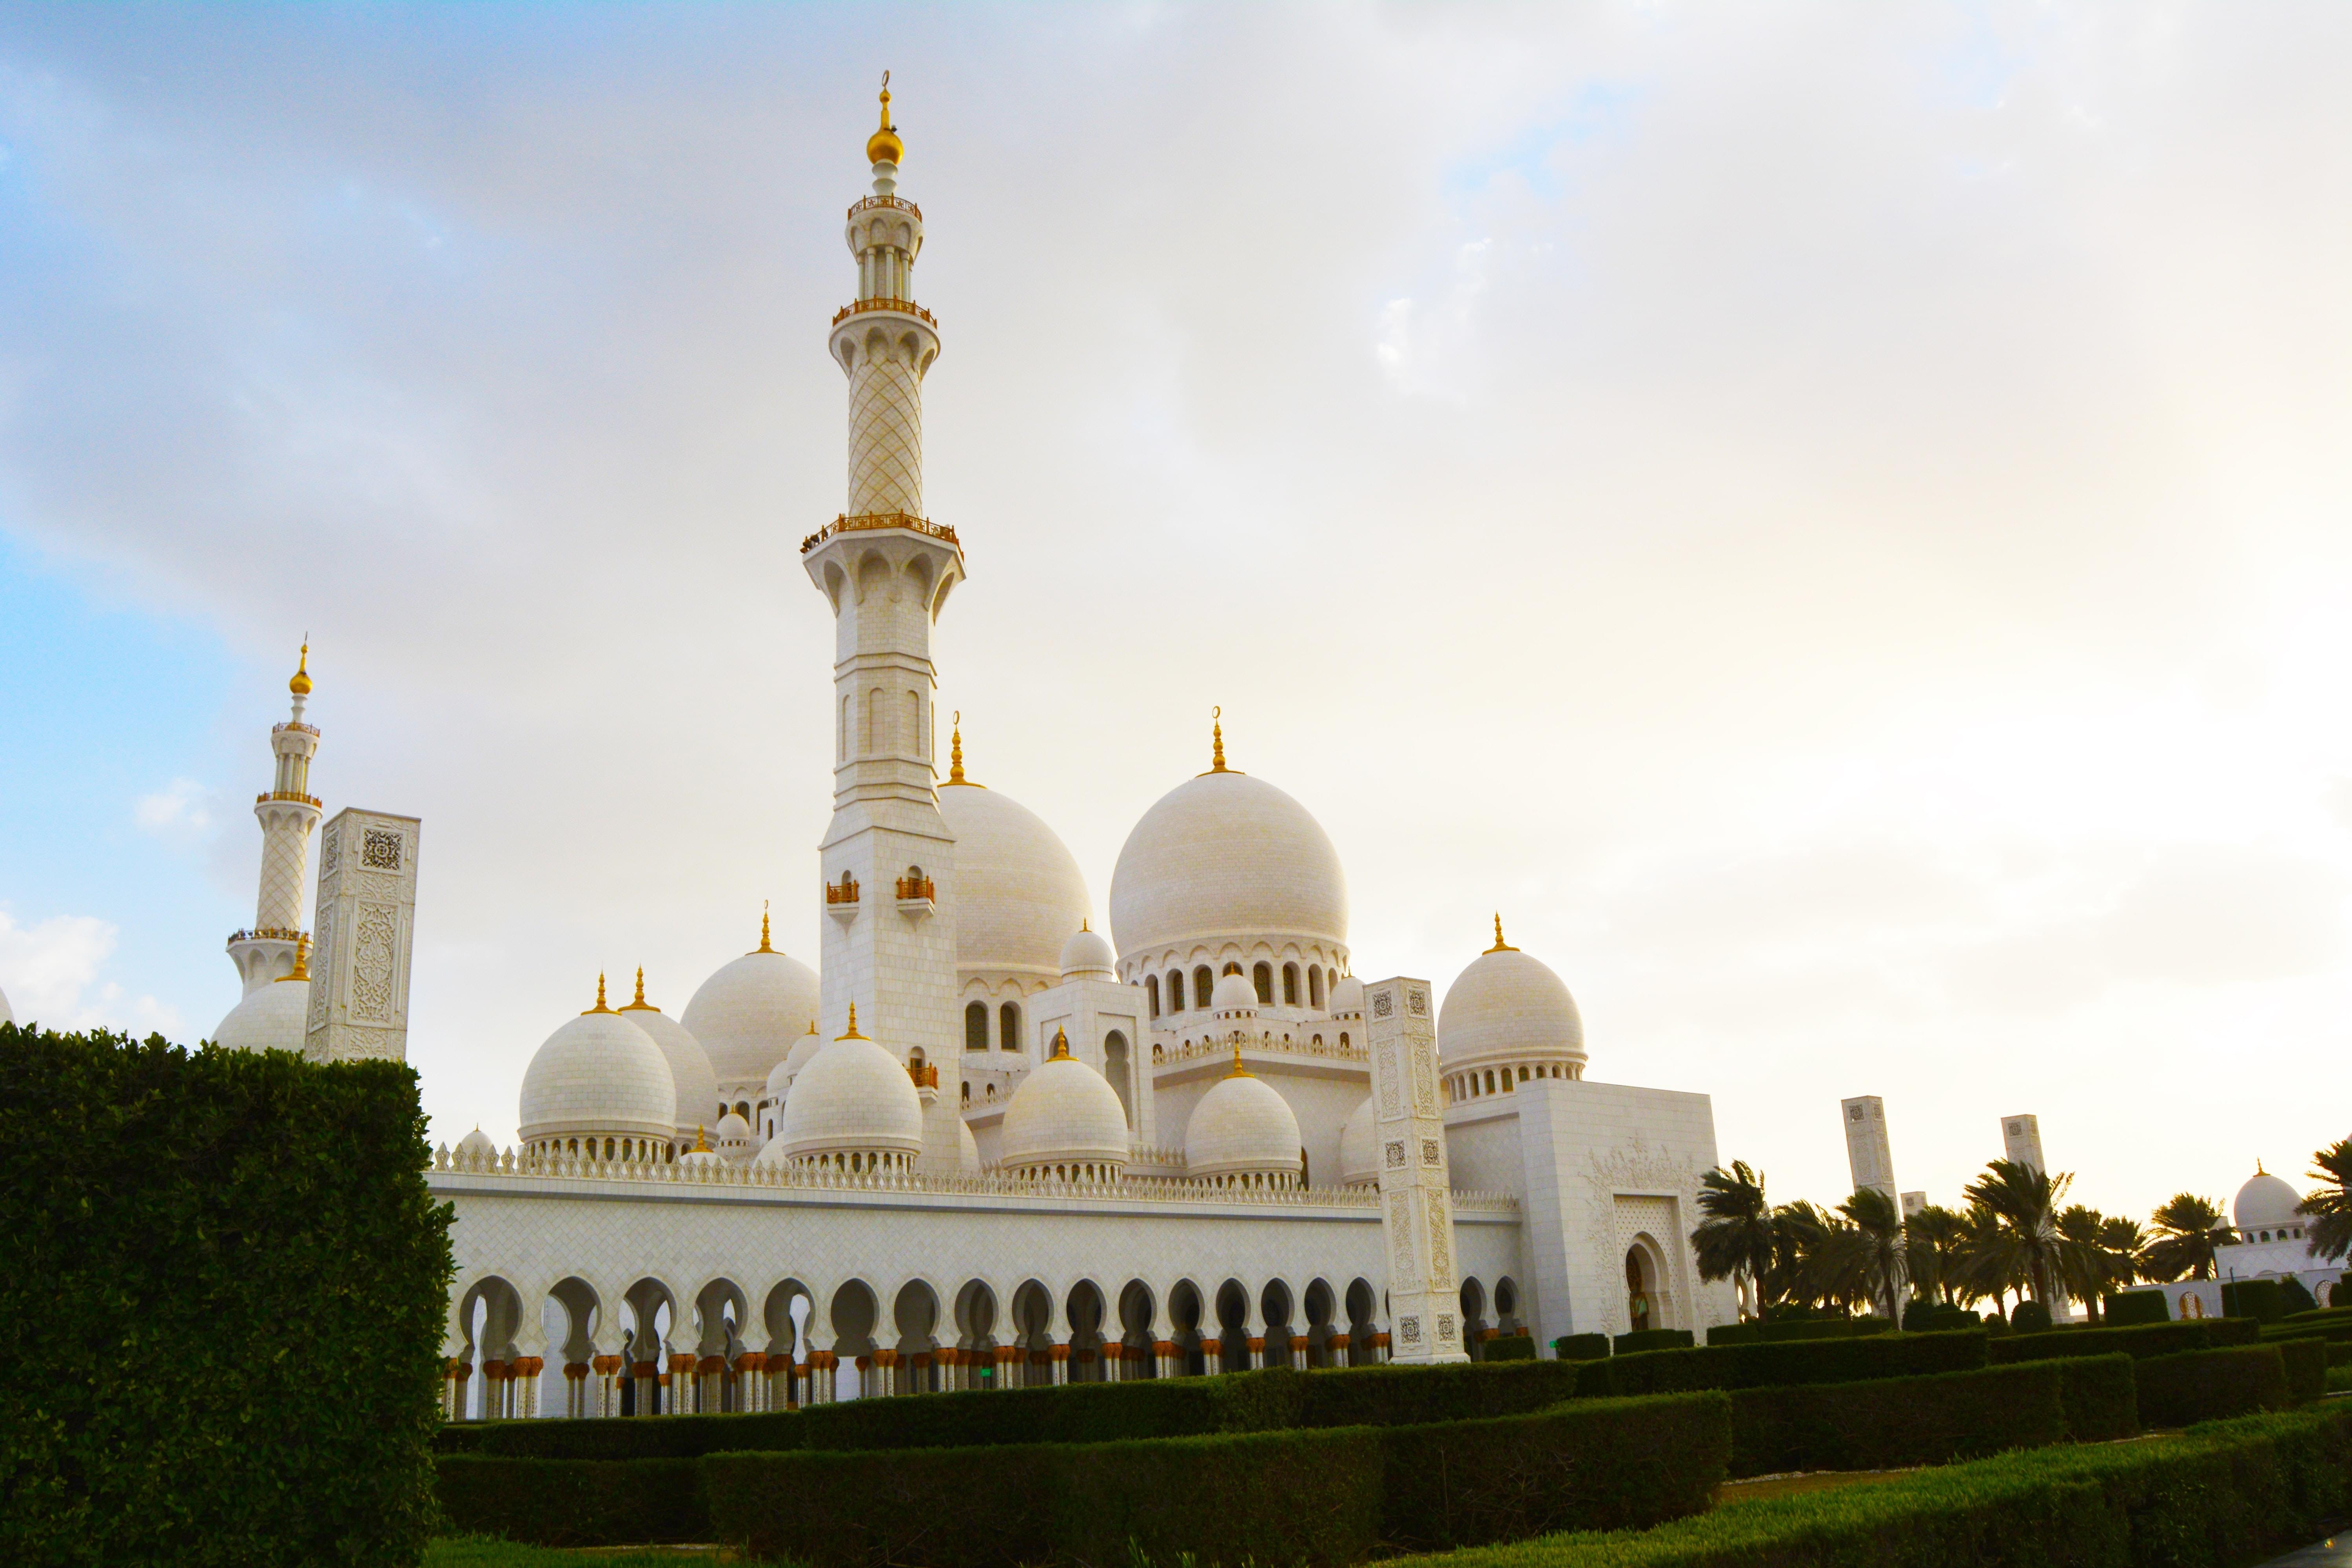 White Mosque in abu dhabi